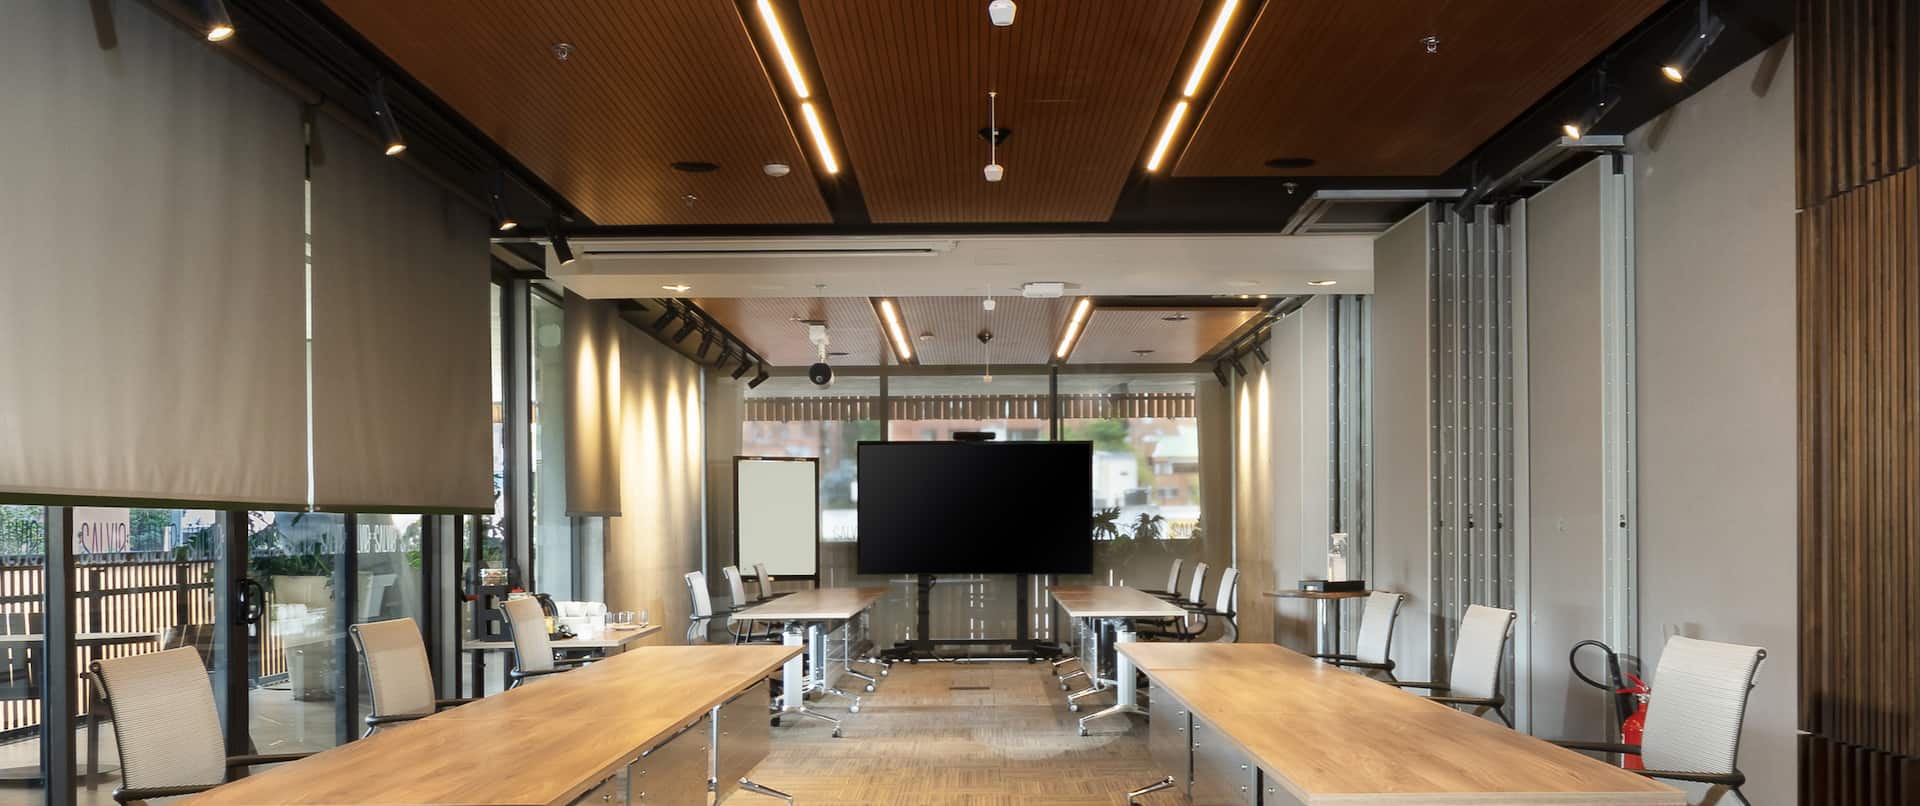 Chicalai Meeting Room with HDTV and Projection Screens